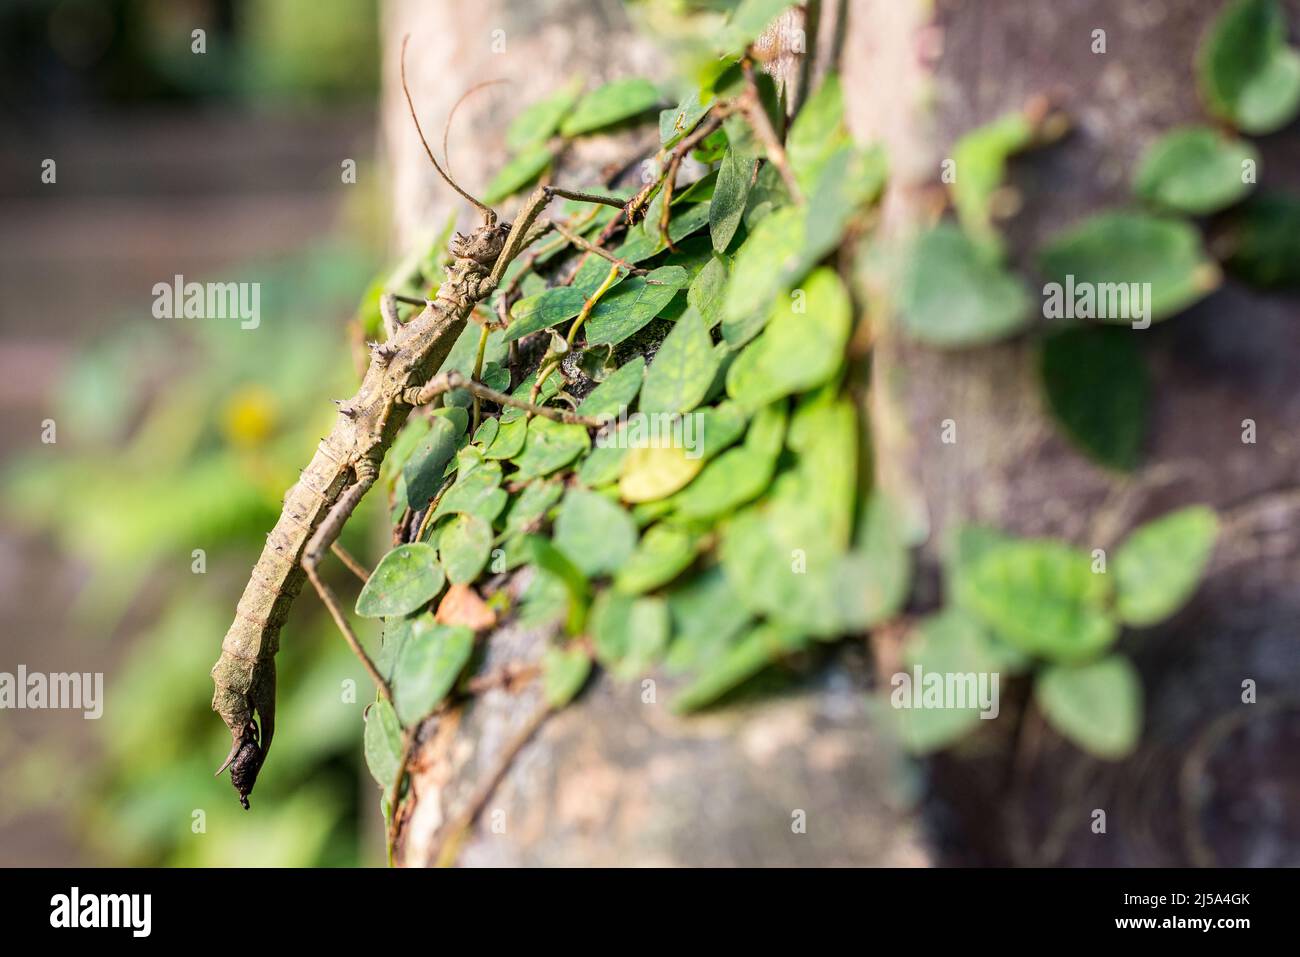 Aretaon asperrimus,with sometimes used common name thorny stick insect. Stock Photo